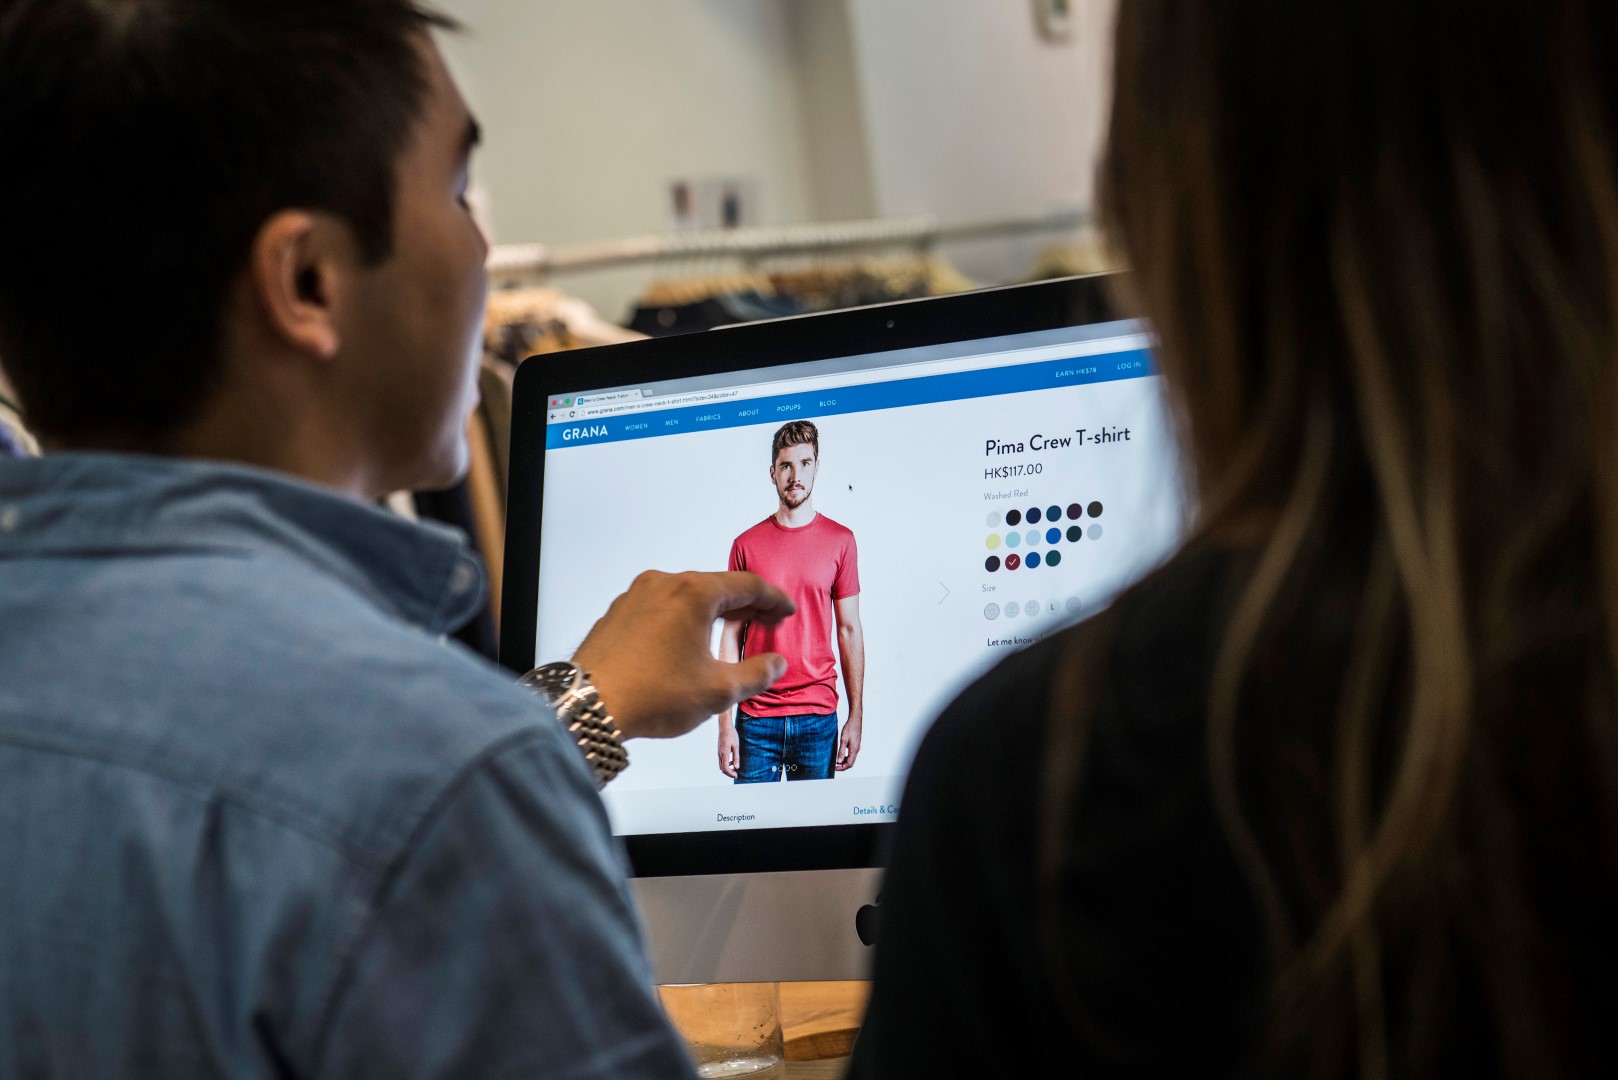 Employees use an Apple Inc. iMac computer the Grana showroom titled "The Fitting Room" in Hong Kong, China, on Tuesday, Oct. 13, 2015. Grana, a Hong Kong-based online clothing retailer, opened a permanent showroom in the Chinese city in mid September, enabling customers to try clothes on before buying them. Photographer: Xaume Olleros/Bloomberg